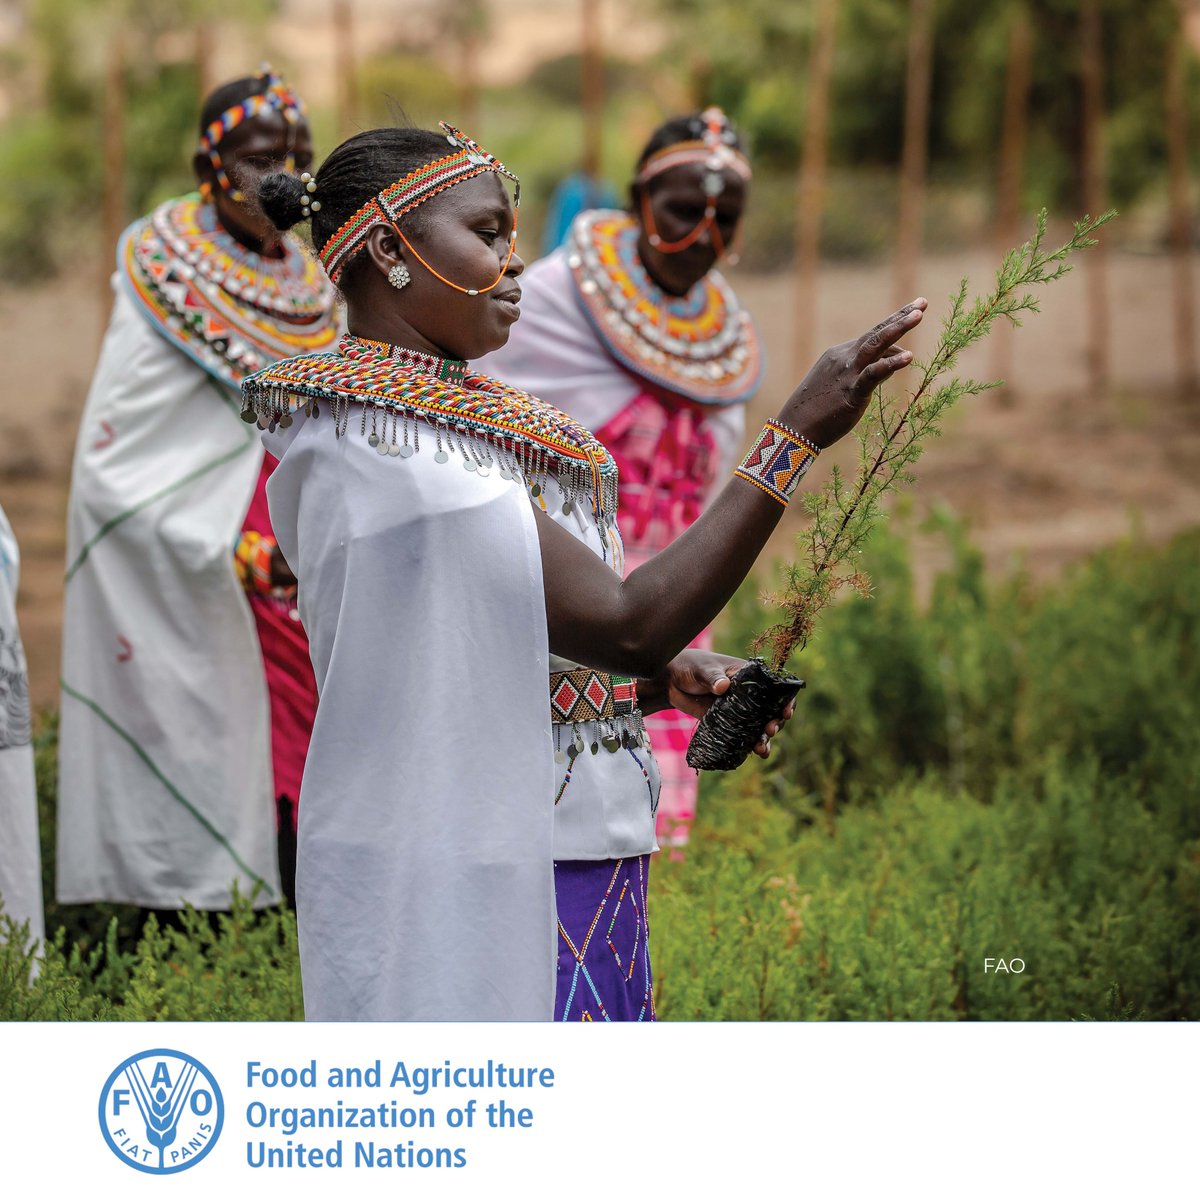 Did you know that 36% of agrifood workers worldwide are women? Yet, #RuralWomen earn nearly 20% less than men and have reduced access to land, credit, technology, and information. This has to change. #LetsGrowEquality!